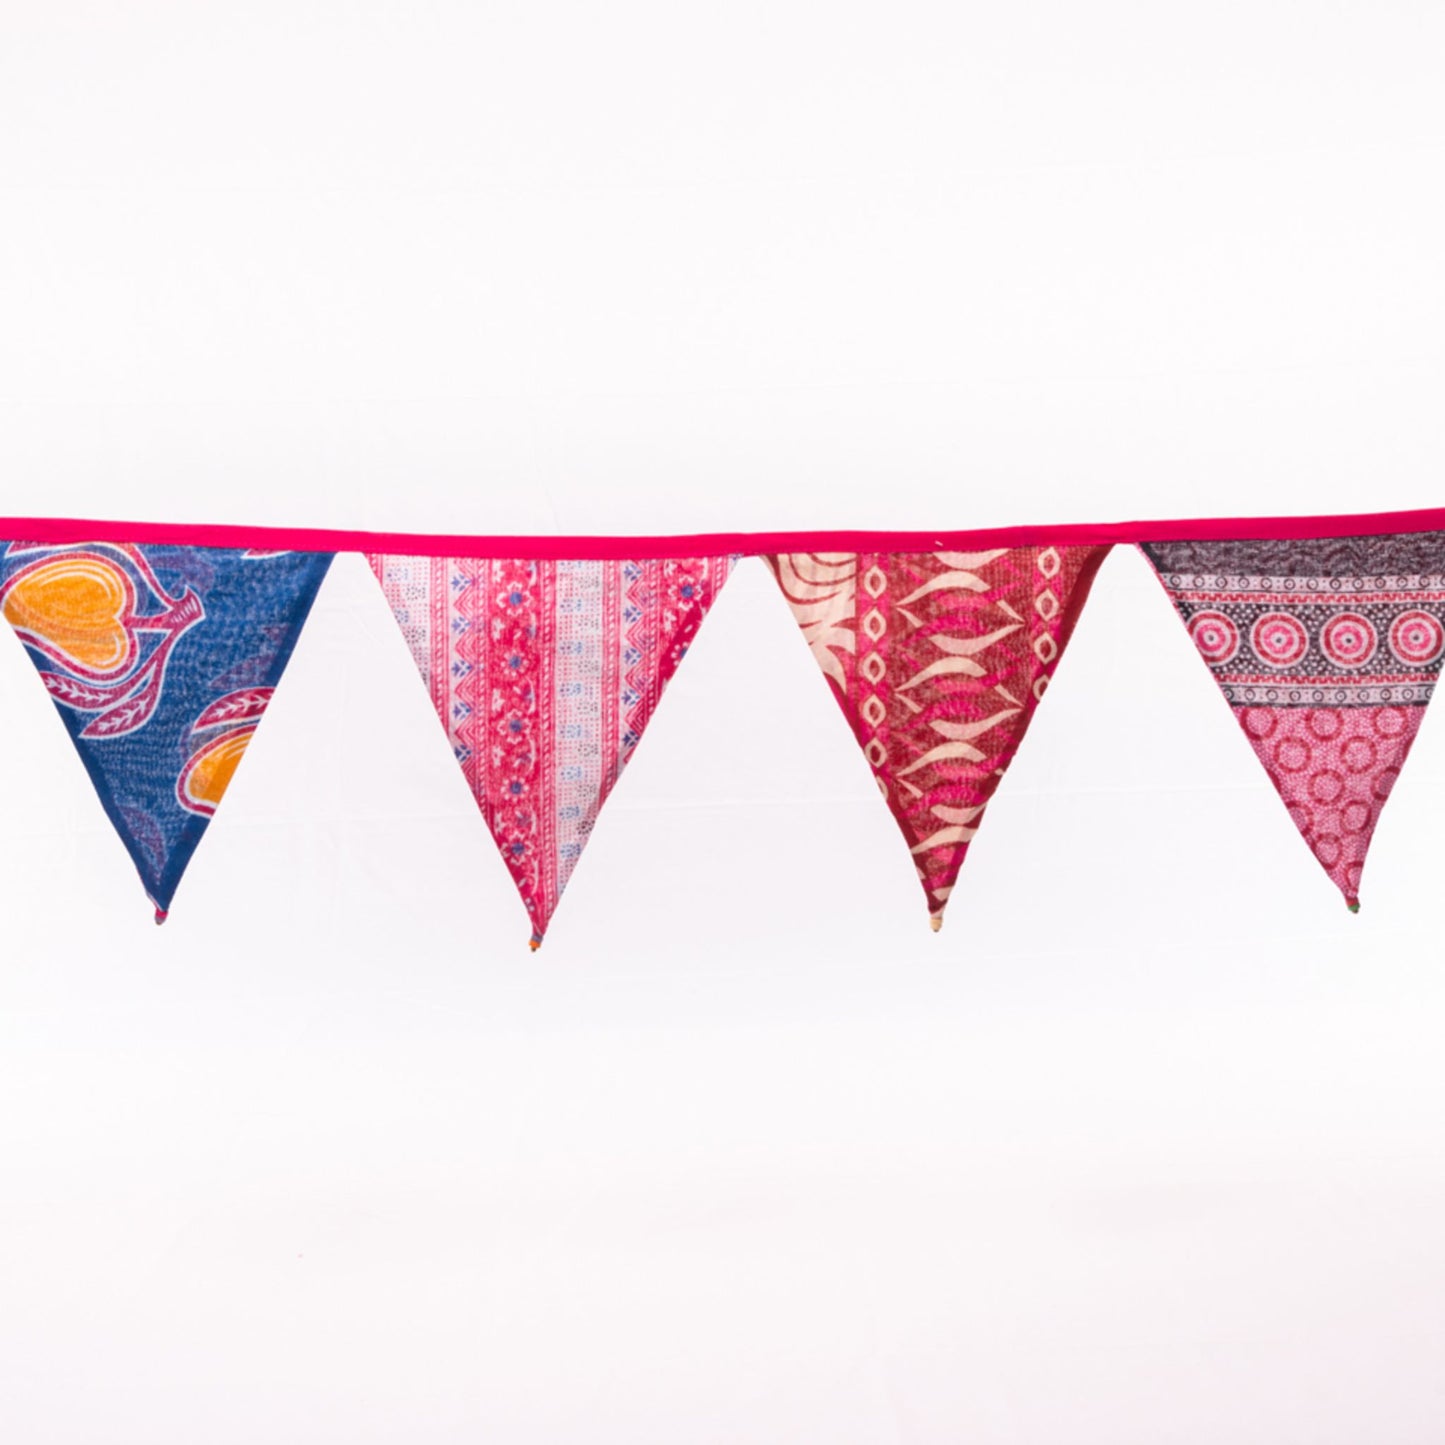 Handmade Bunting with Beads - Pink